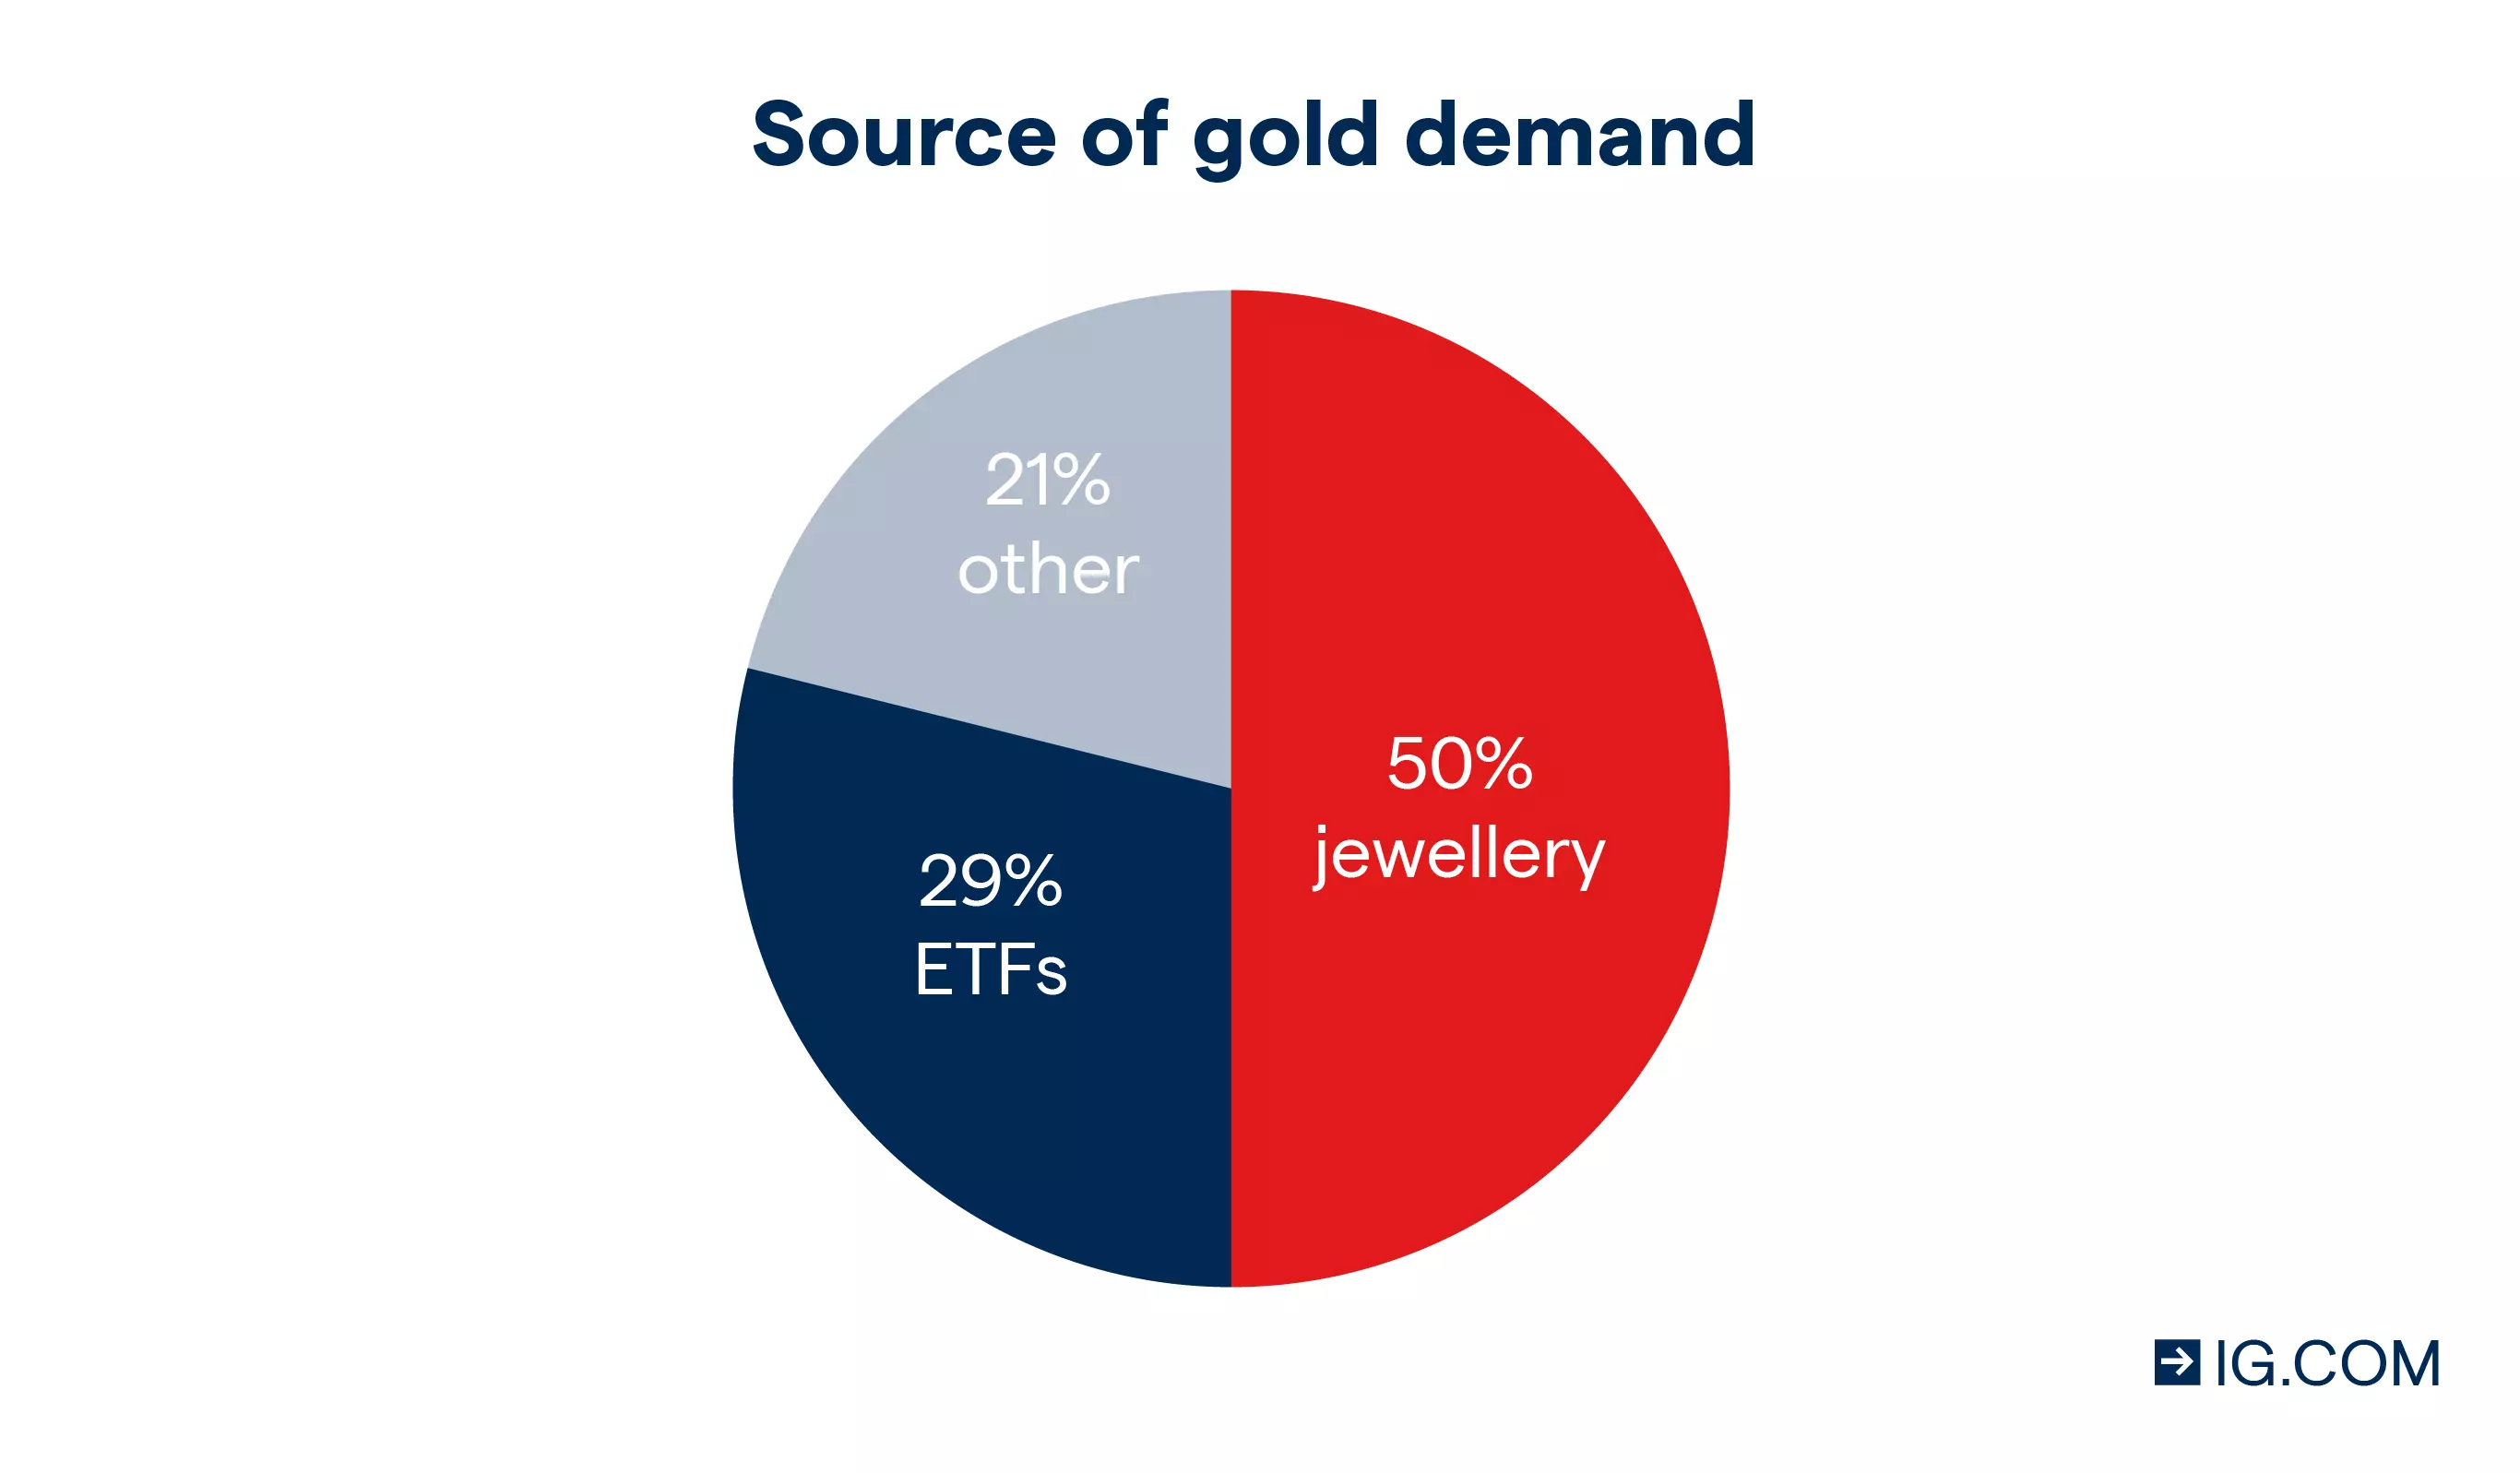 Gold trading: source of demand for gold